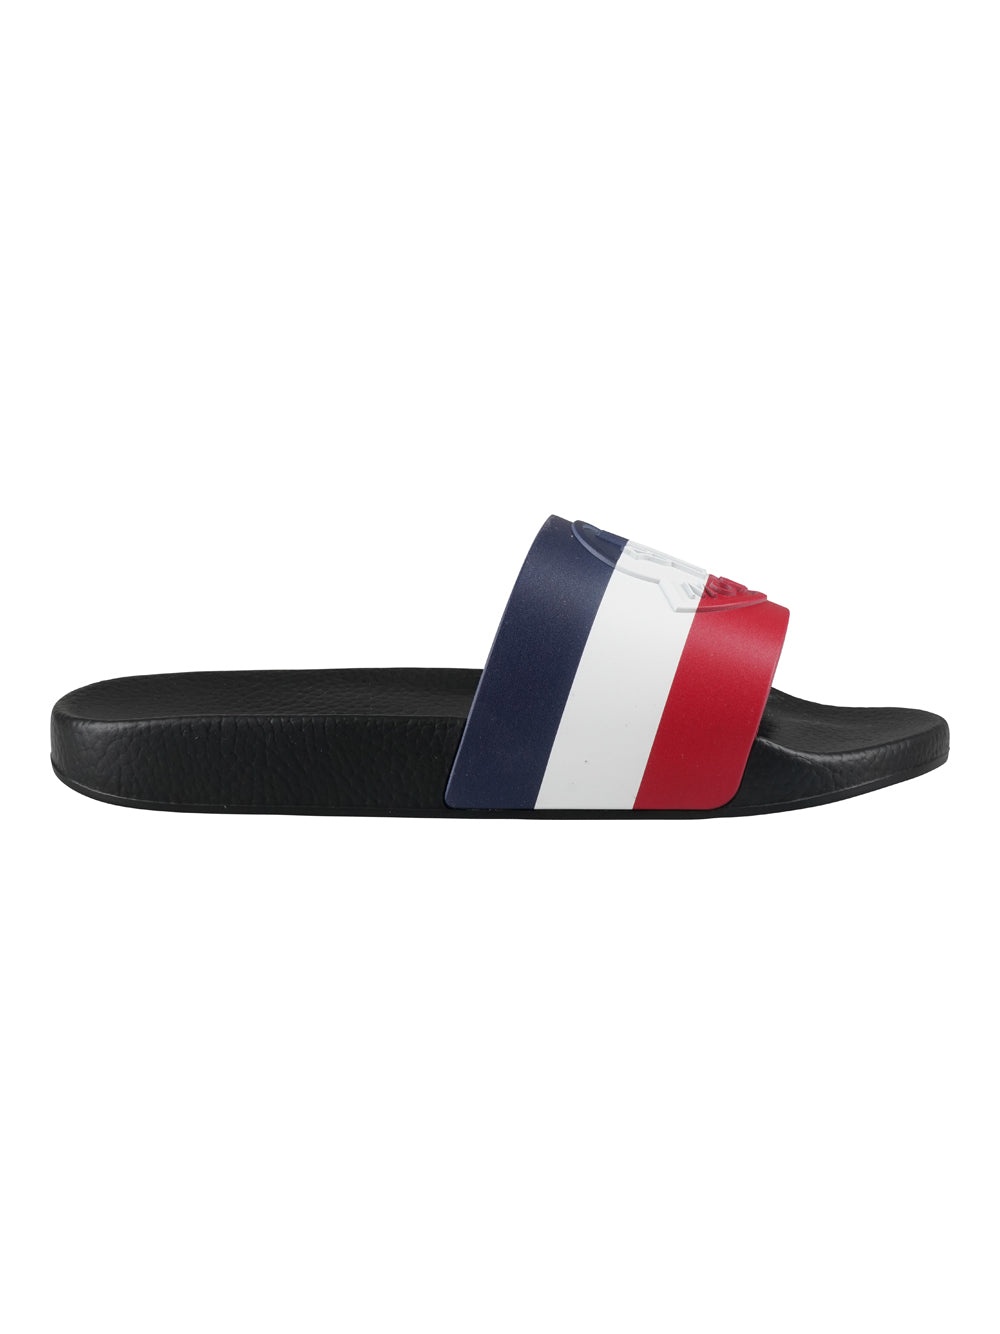 MONCLER MULTICOLOR SLIPPERS - 13